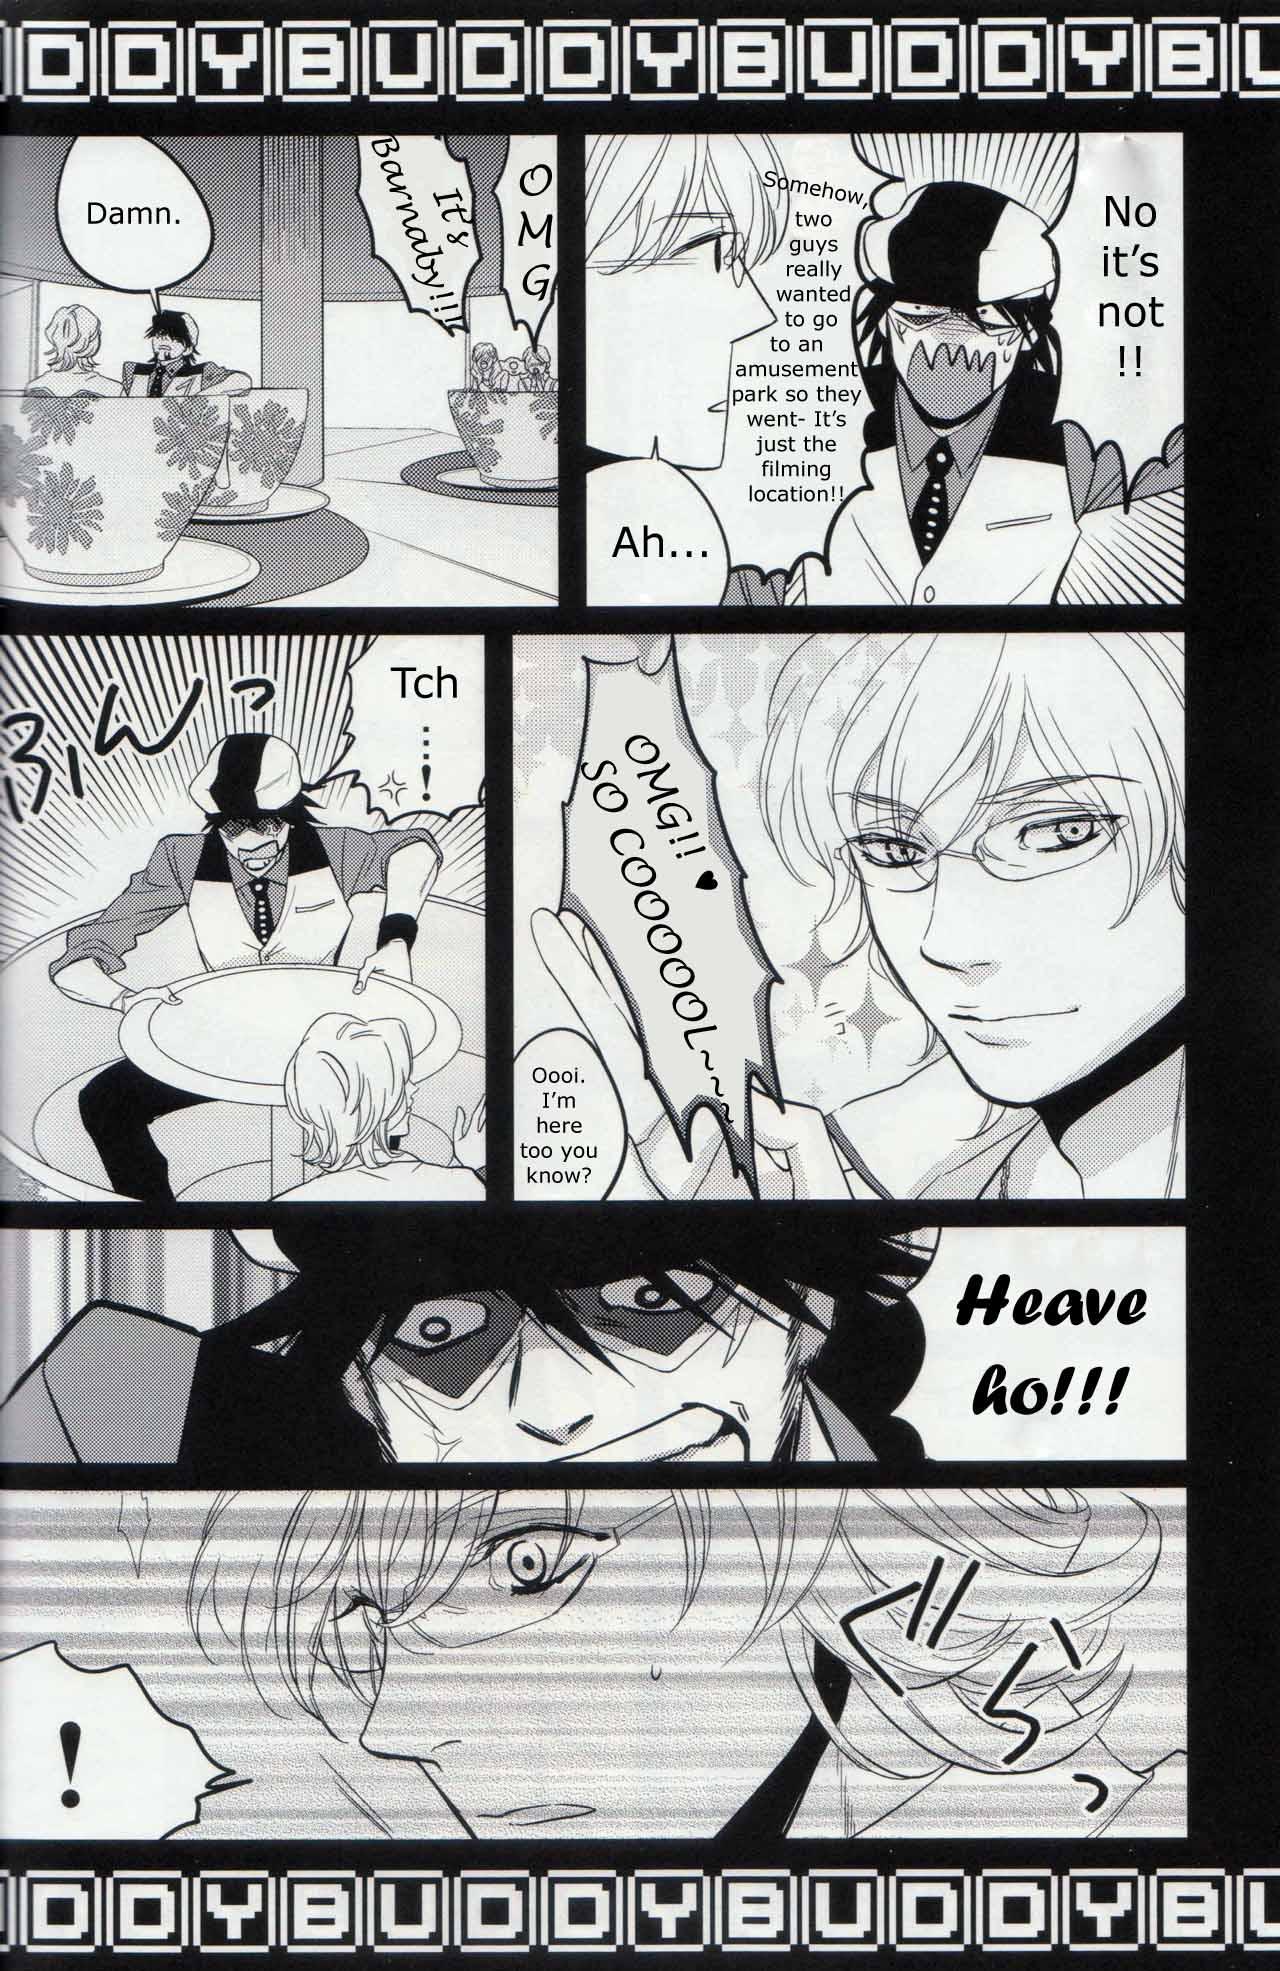 French Porn Buddy - Tiger and bunny Couples - Page 8